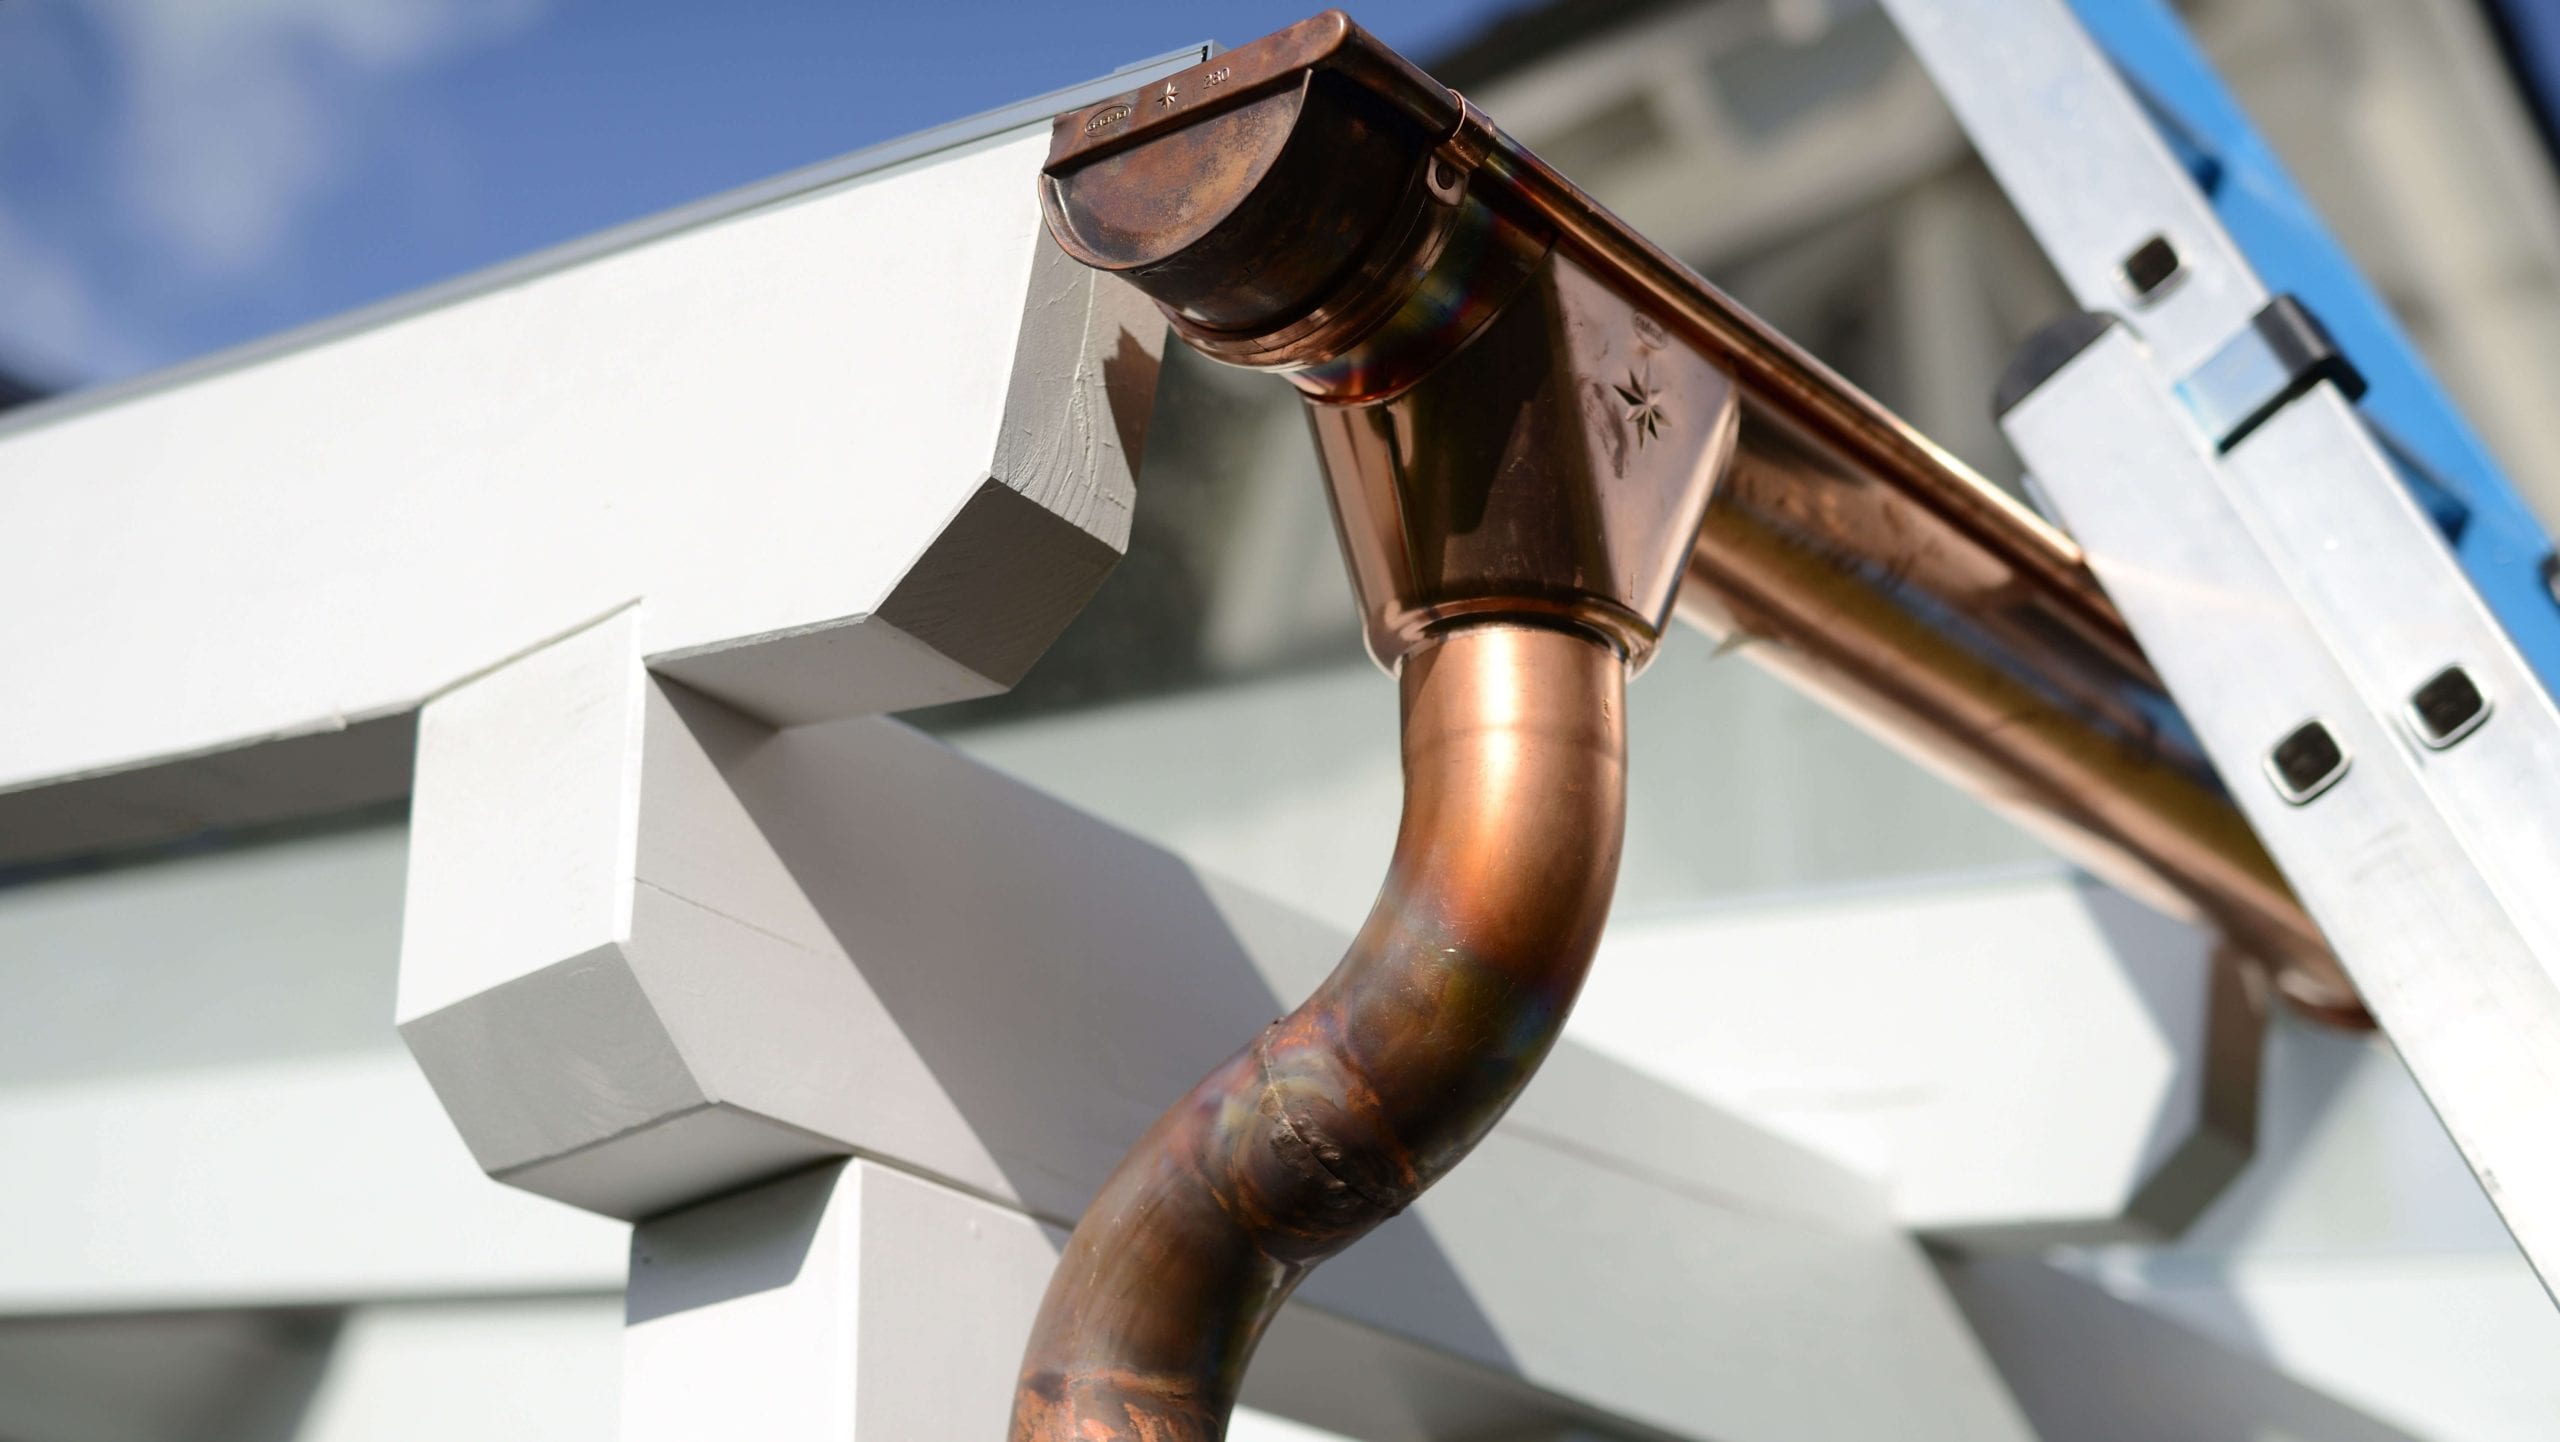 Make your property stand out with copper gutters. Contact for gutter installation in Cary